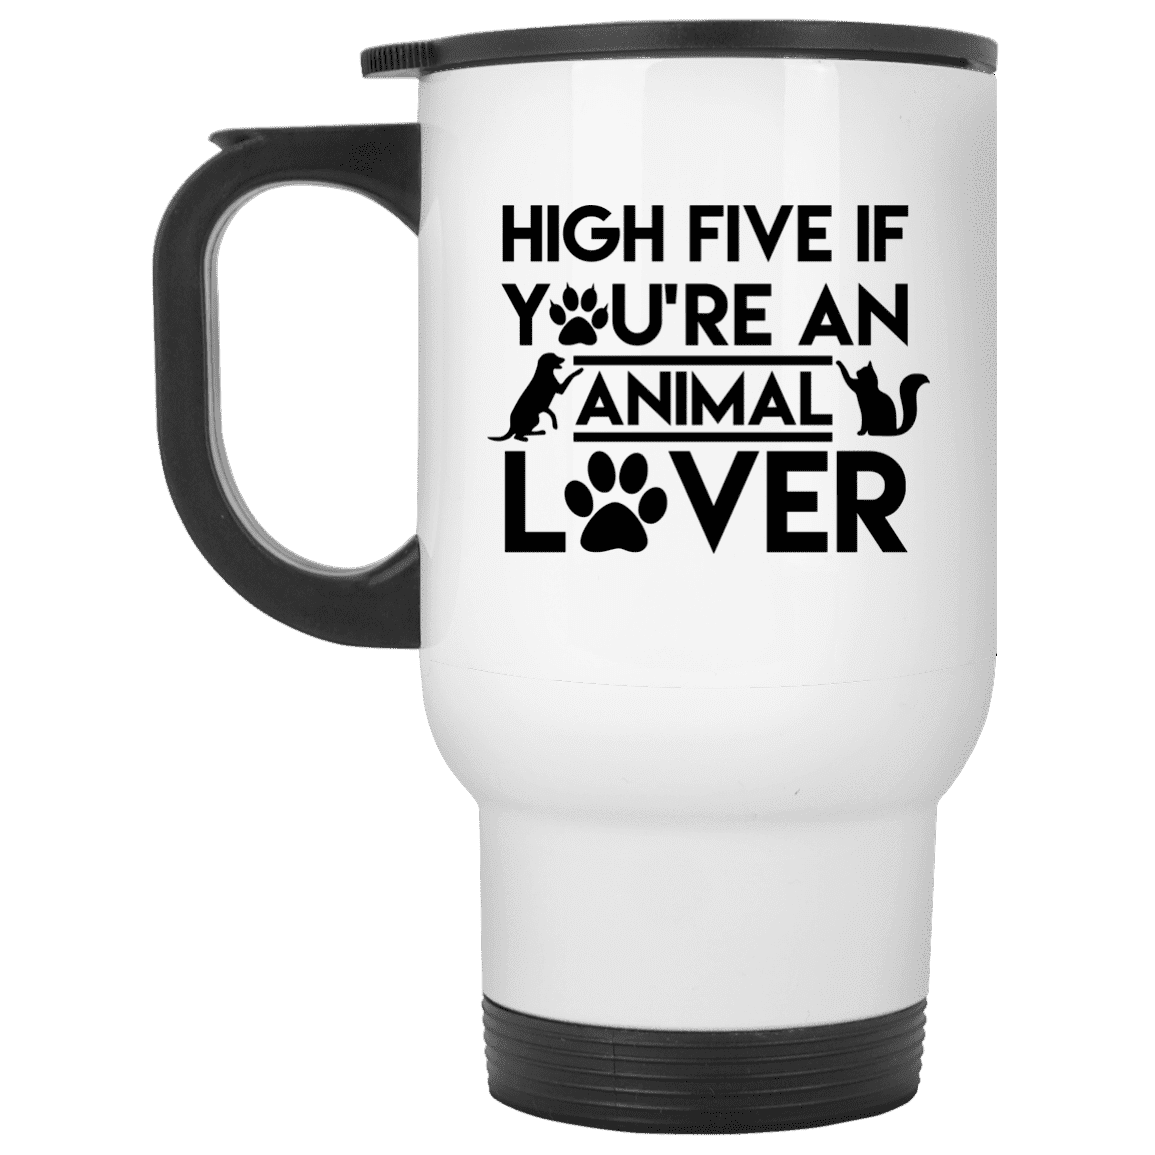 High Five If You're An Animal Lover - Mugs.